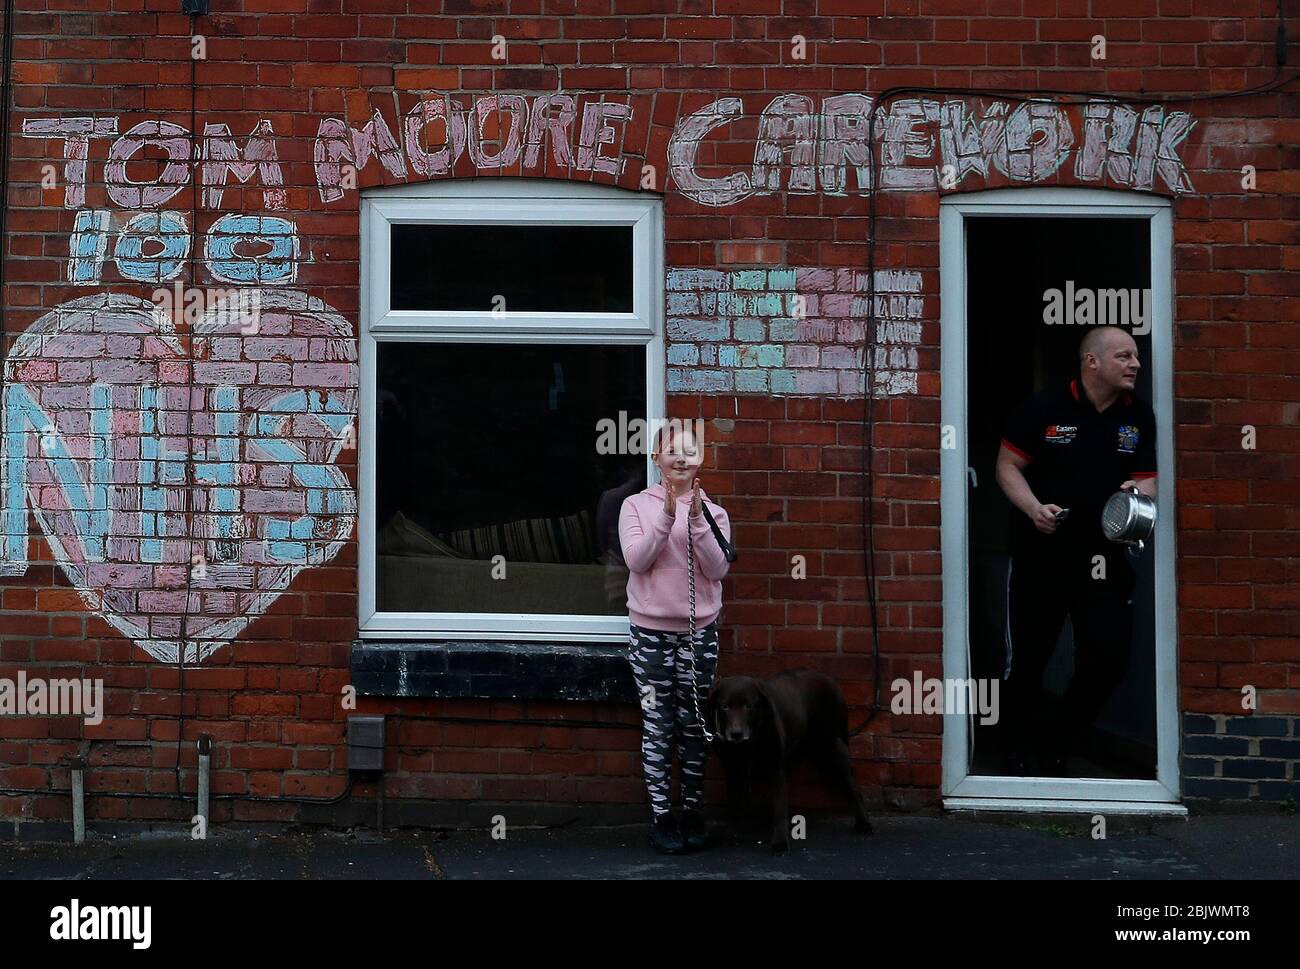 Anstey, Leicestershire, UK. 30th April 2020. Kevin and Ayla Ward applaud to show their appreciation for NHS workers and Captain Tom Moore during the coronavirus pandemic lockdown Clap for Carers event. Credit Darren Staples/Alamy Live News. Stock Photo